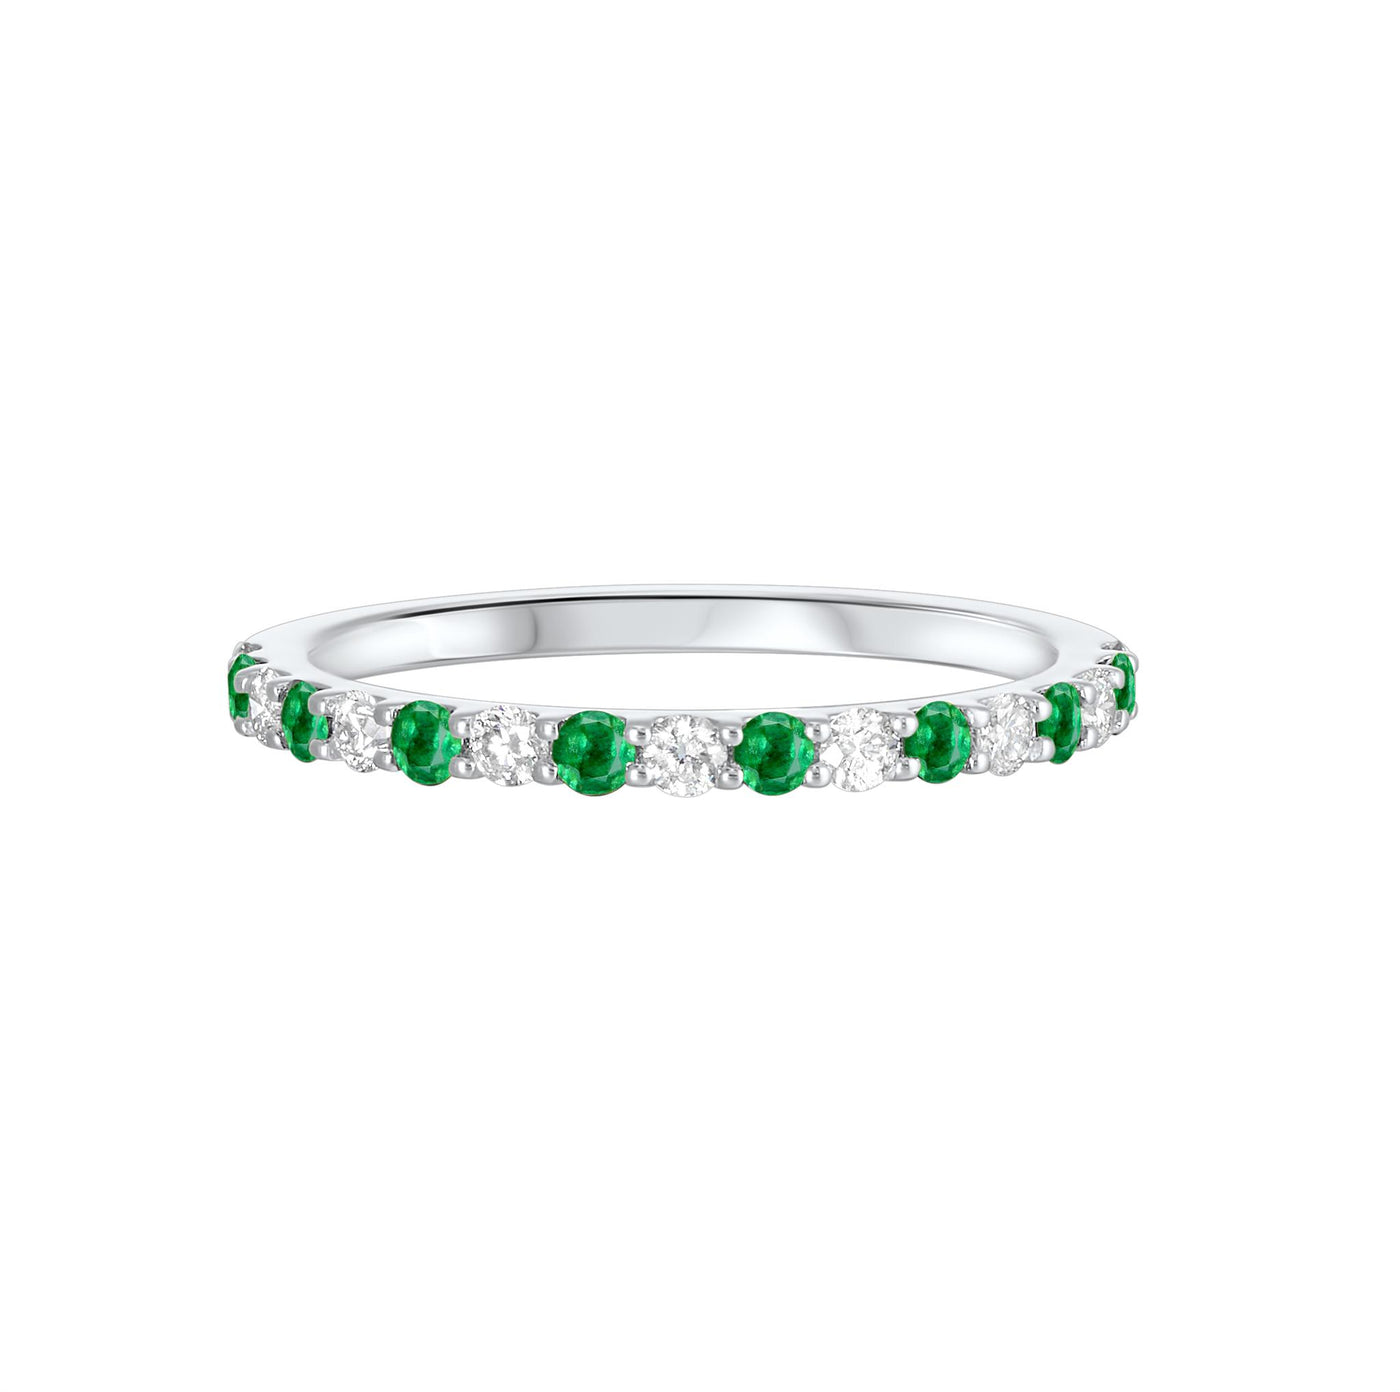 10K White Gold .40ctw Alterting Gemstone Style Ring with Diamonds and Emeralds